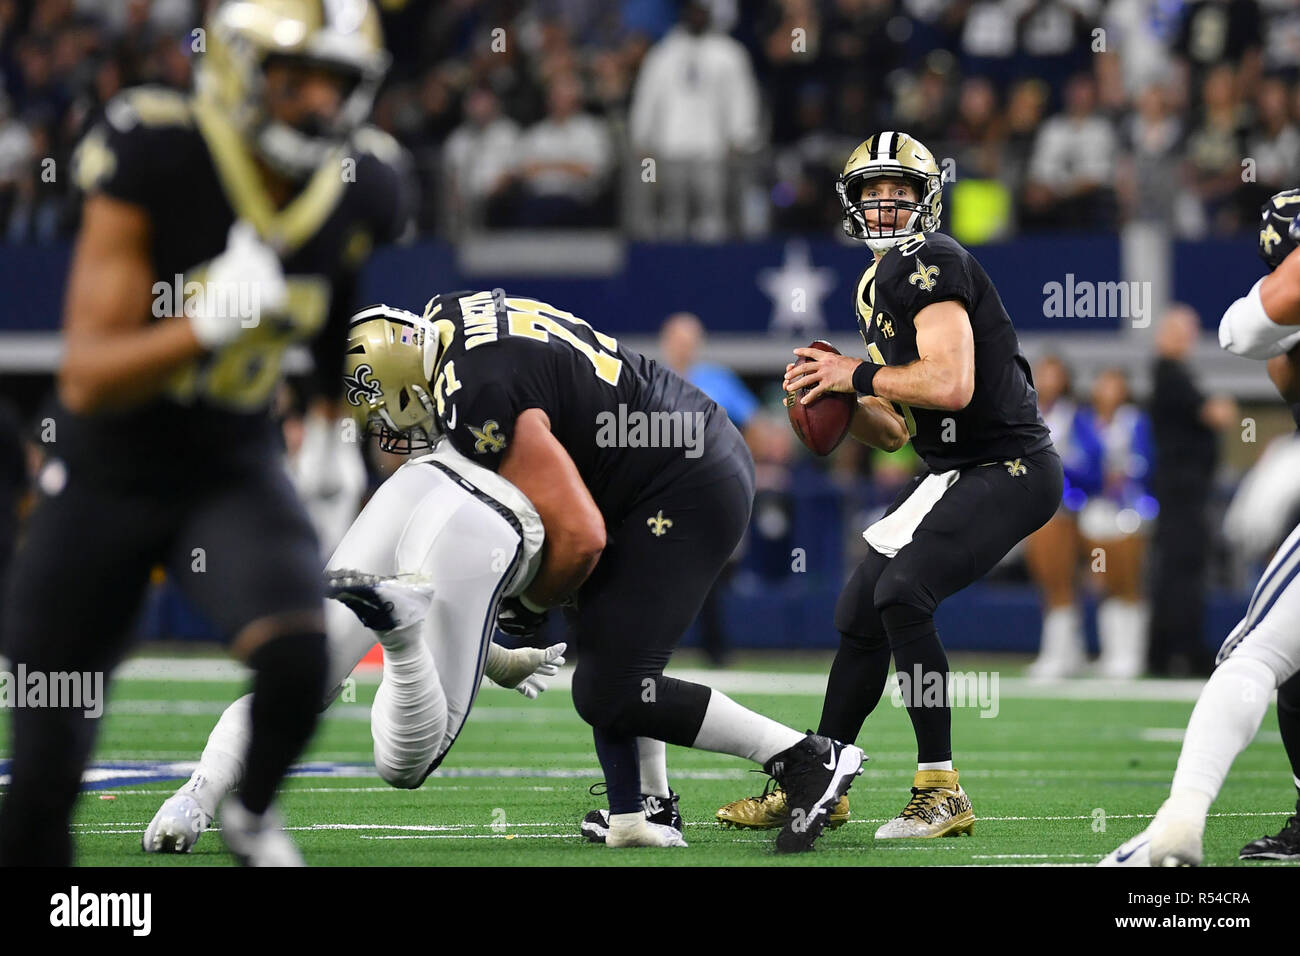 Arlington, Texas, USA. 29th Nov, 2018. New Orleans Saints quarterback Drew Brees (9) drops back to pass during the second half of the NFL game between the New Orleans Saints and the Dallas Cowboys at AT&T Stadium in Arlington, Texas. Dallas won the game 13-10. Shane Roper/Cal Sport Media/Alamy Live News Stock Photo